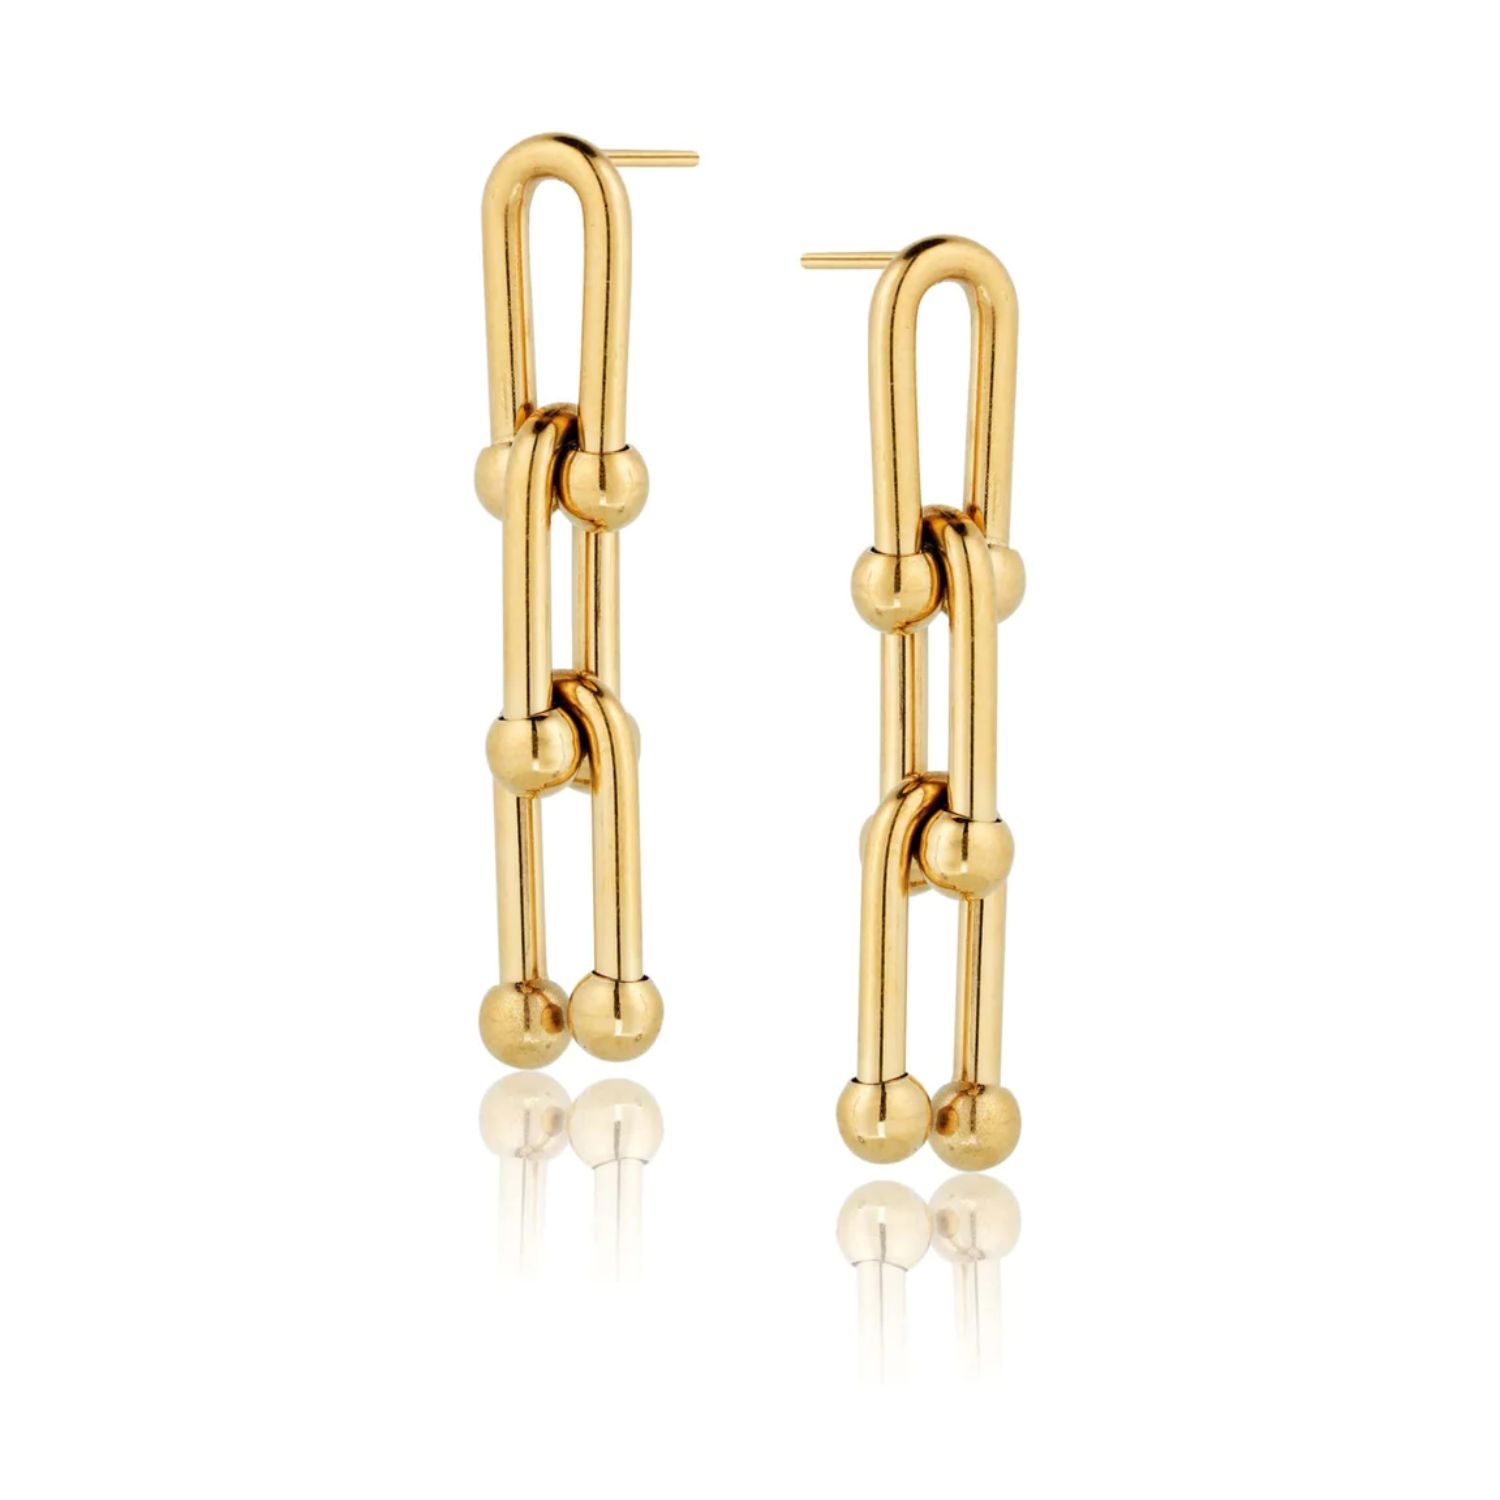 Gold Tiffany link earrings. These earrings are made of high-quality materials. Their gold-plated brass shines beautifully. They look good with any outfit, whether it's for a special occasion or your everyday clothes. These earrings will be an excellent addition to your jewelry collection.